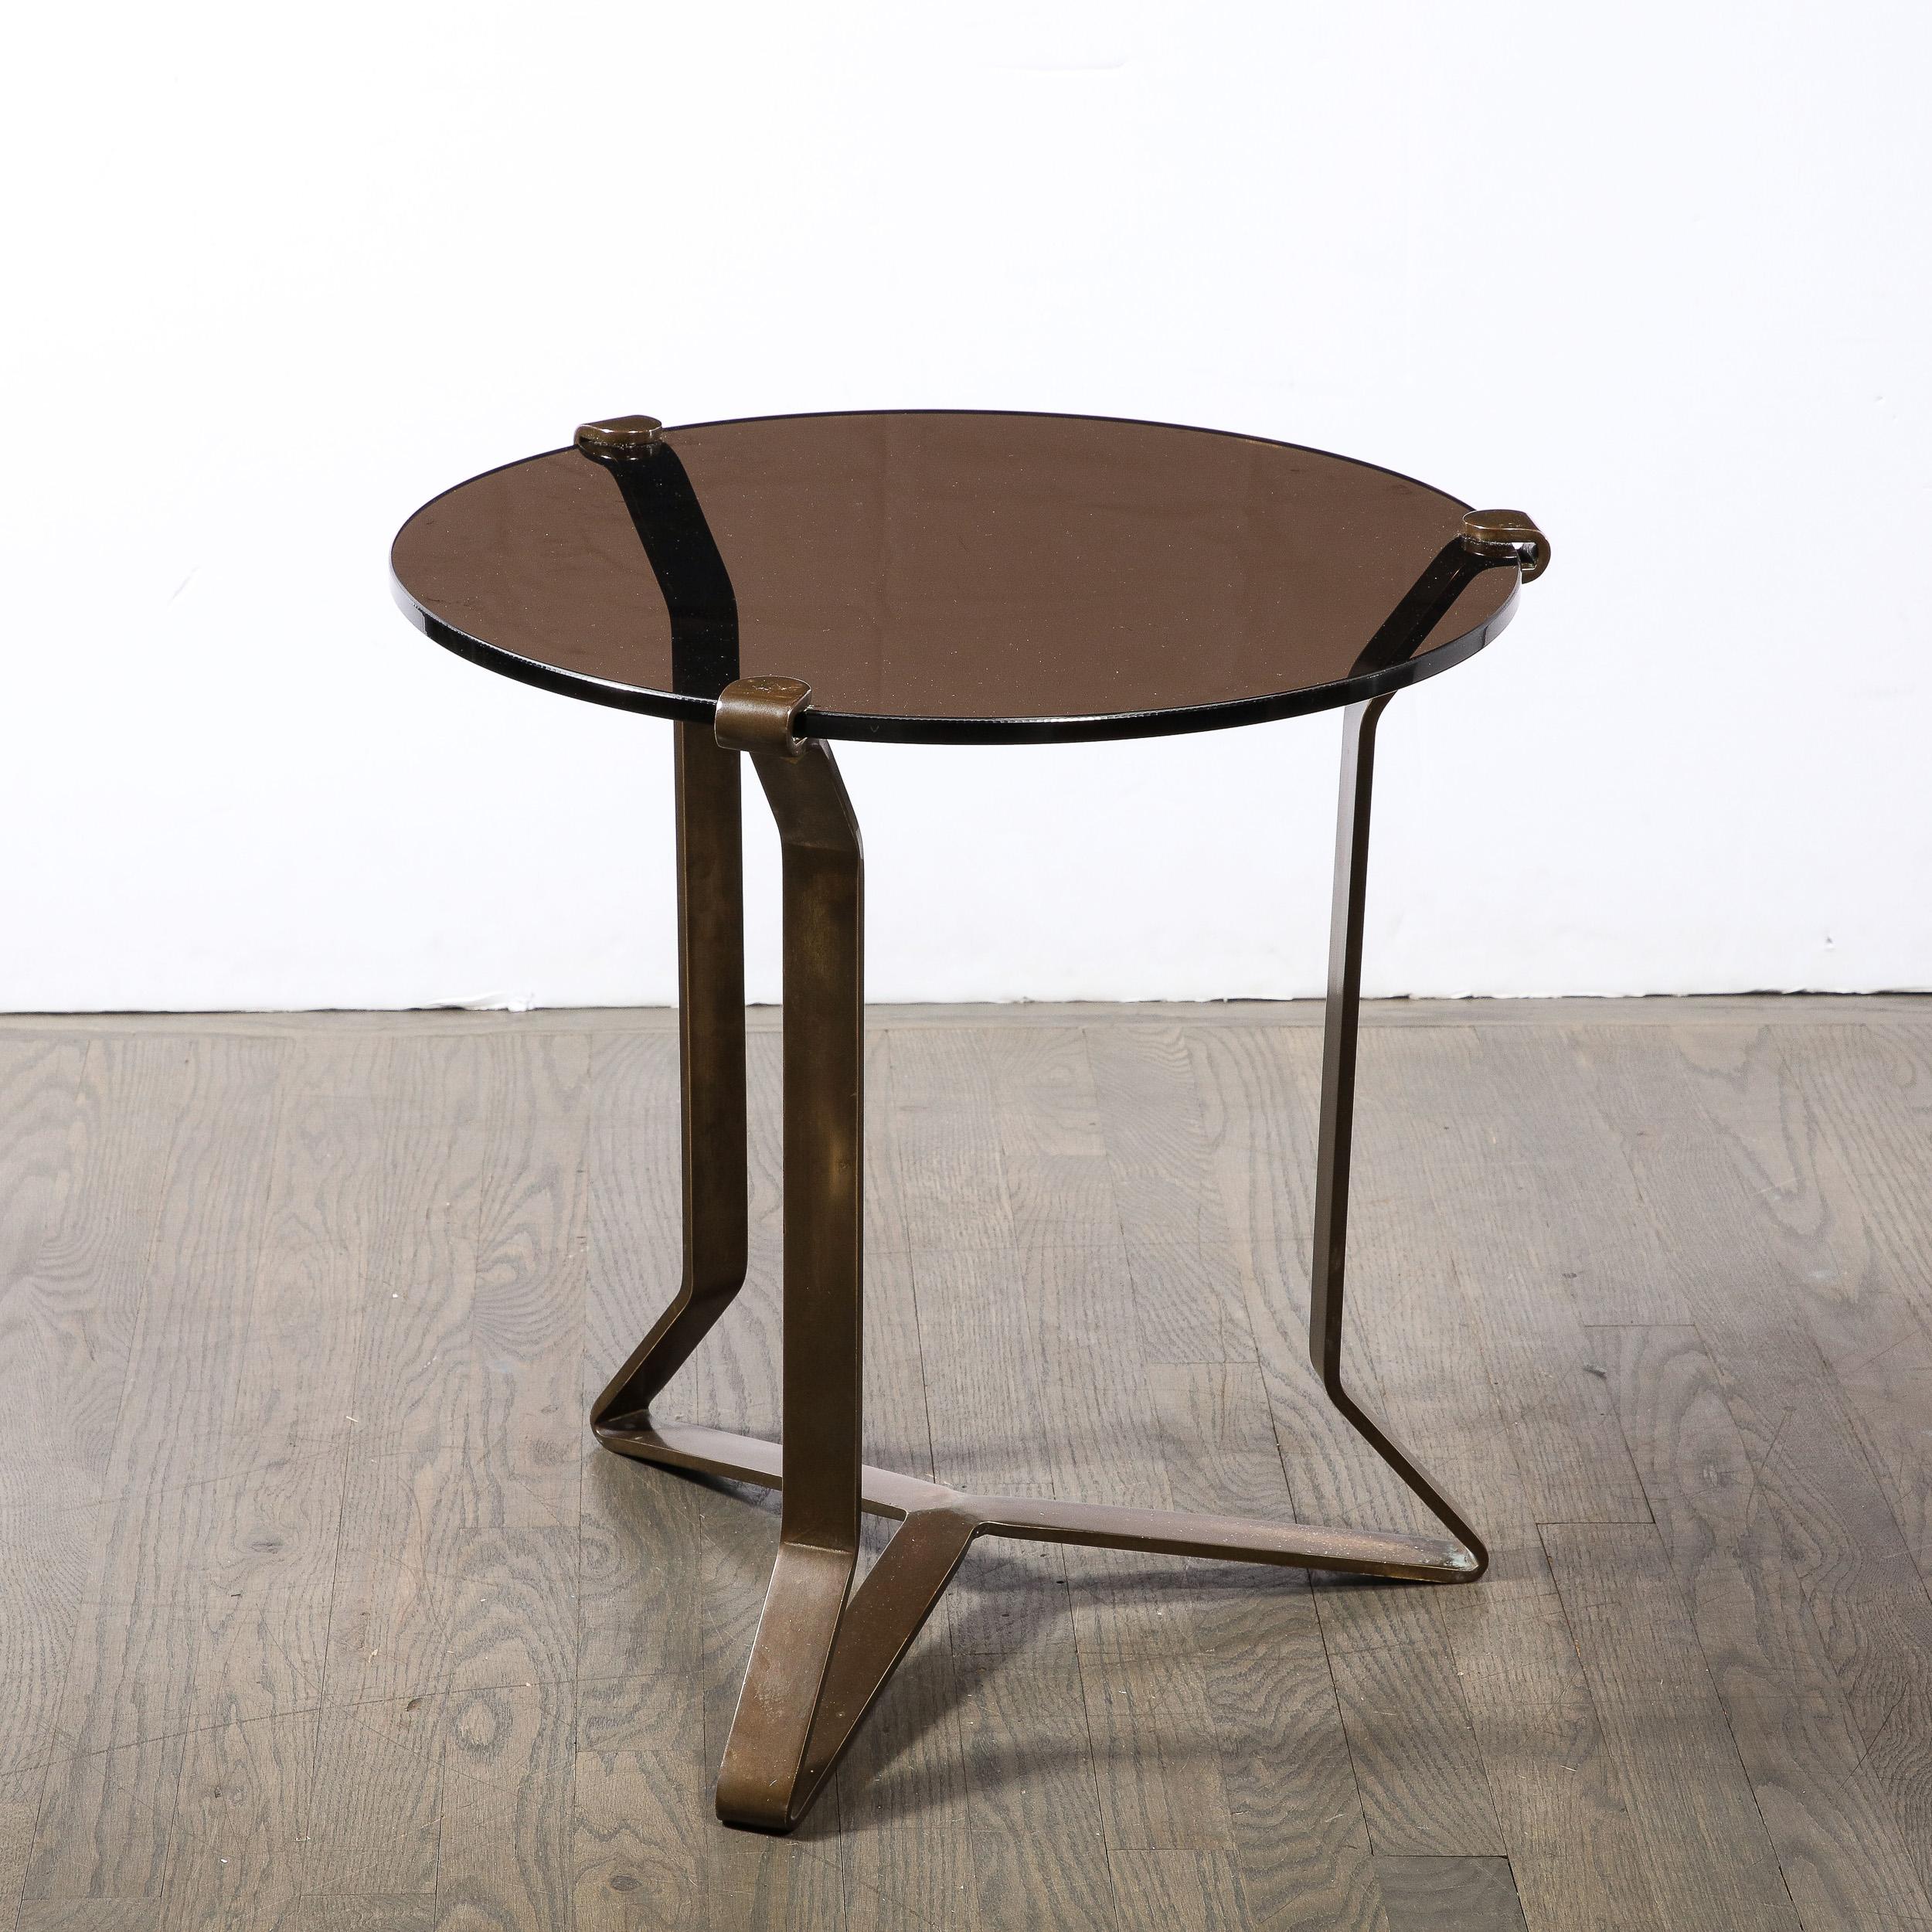 American Mid-Century Modernist Bronze & Smoked Glass Side/ Occasional Table For Sale